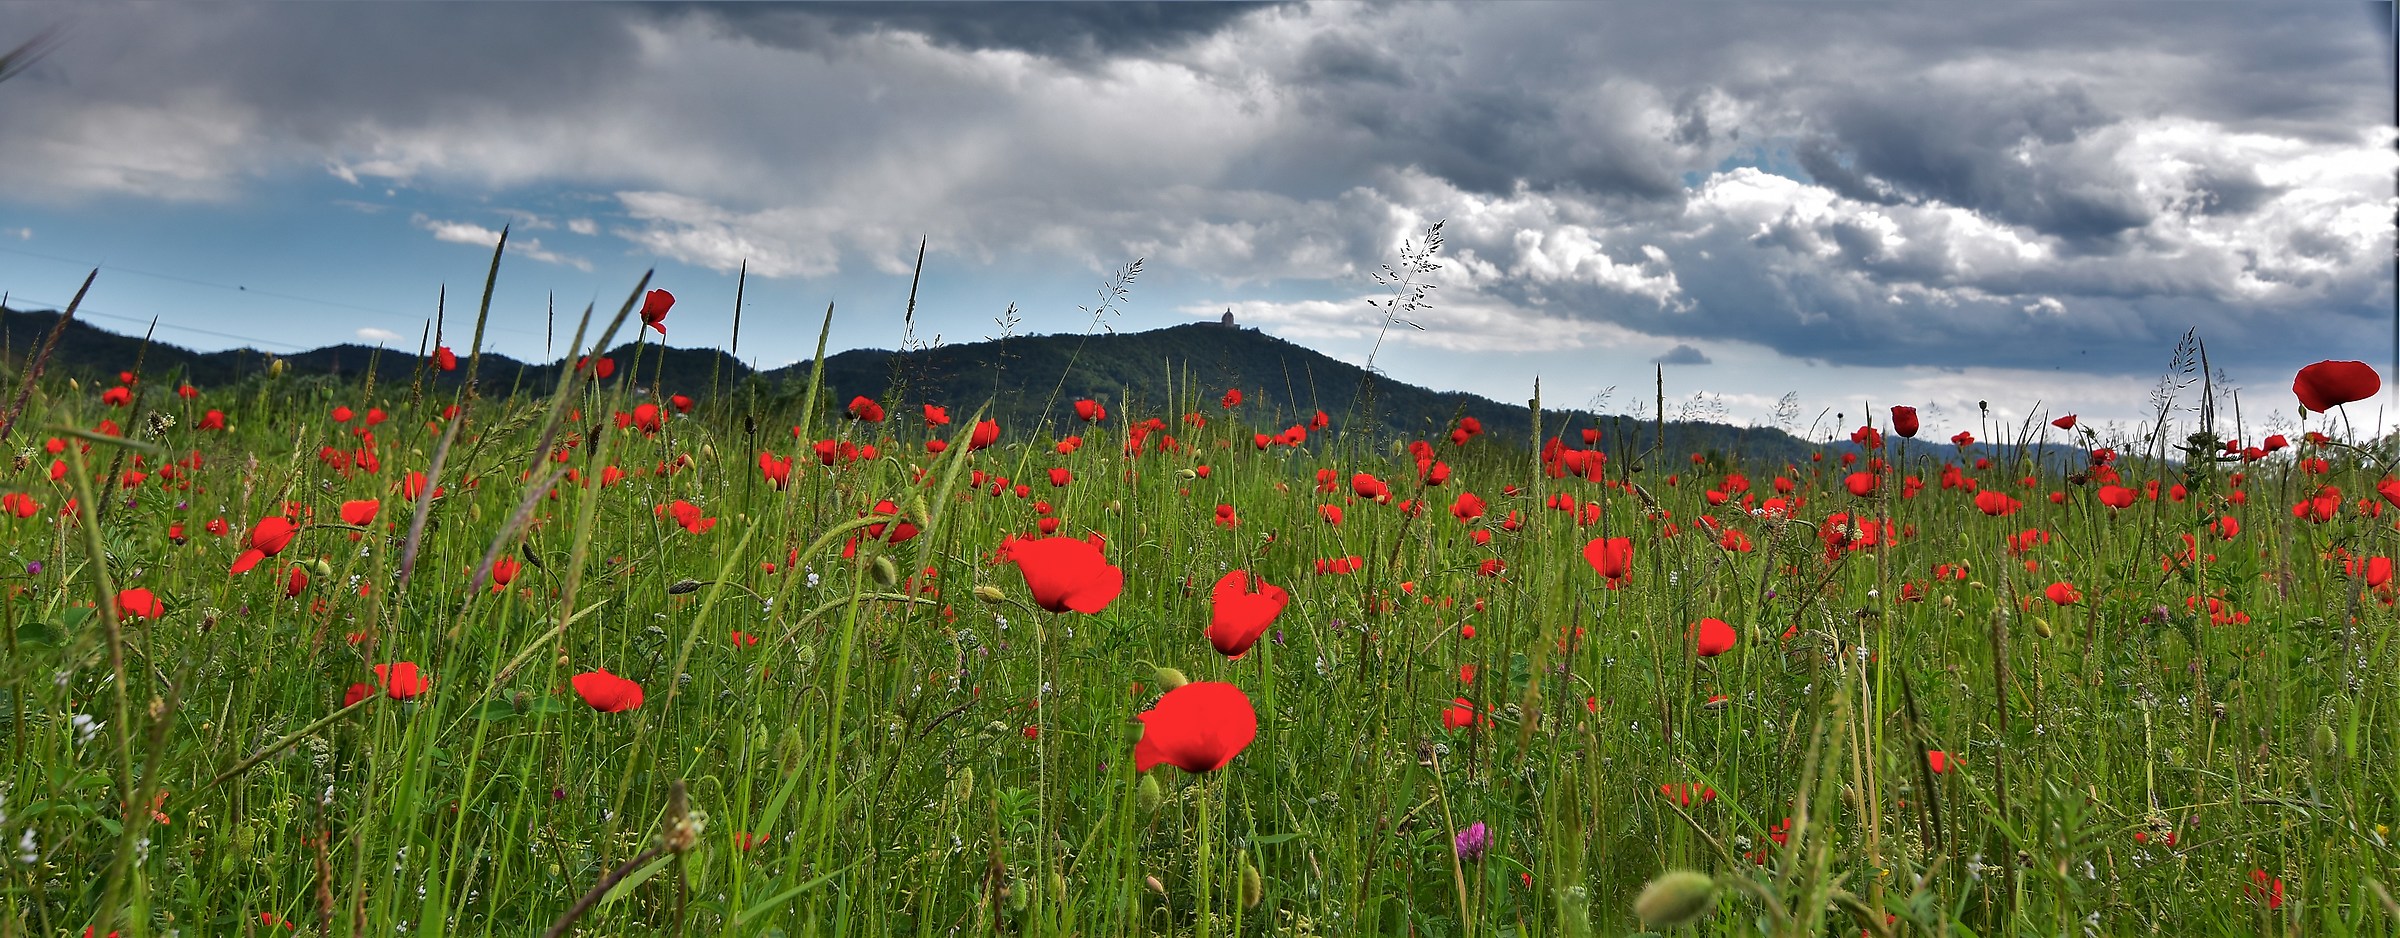 poppies and .....